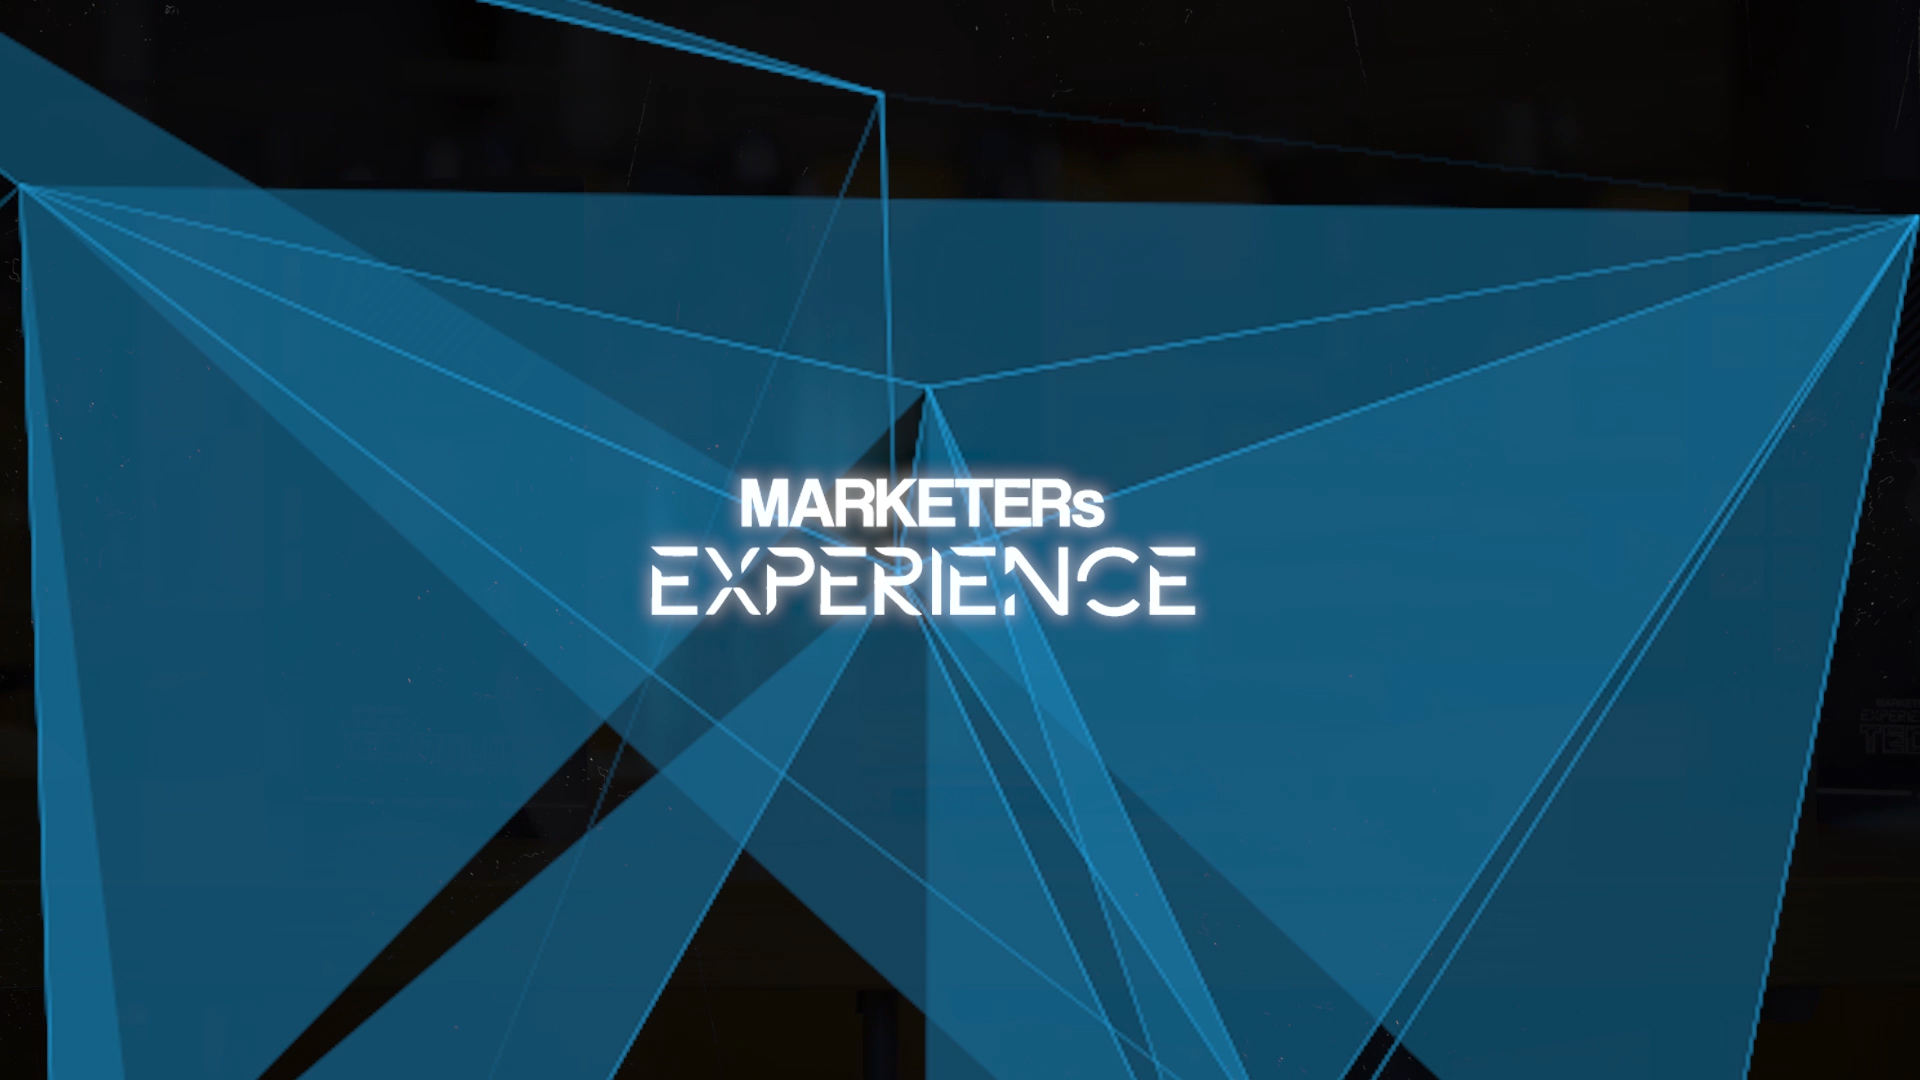 MARKETERS CLUB – EXPERIENCE 2017